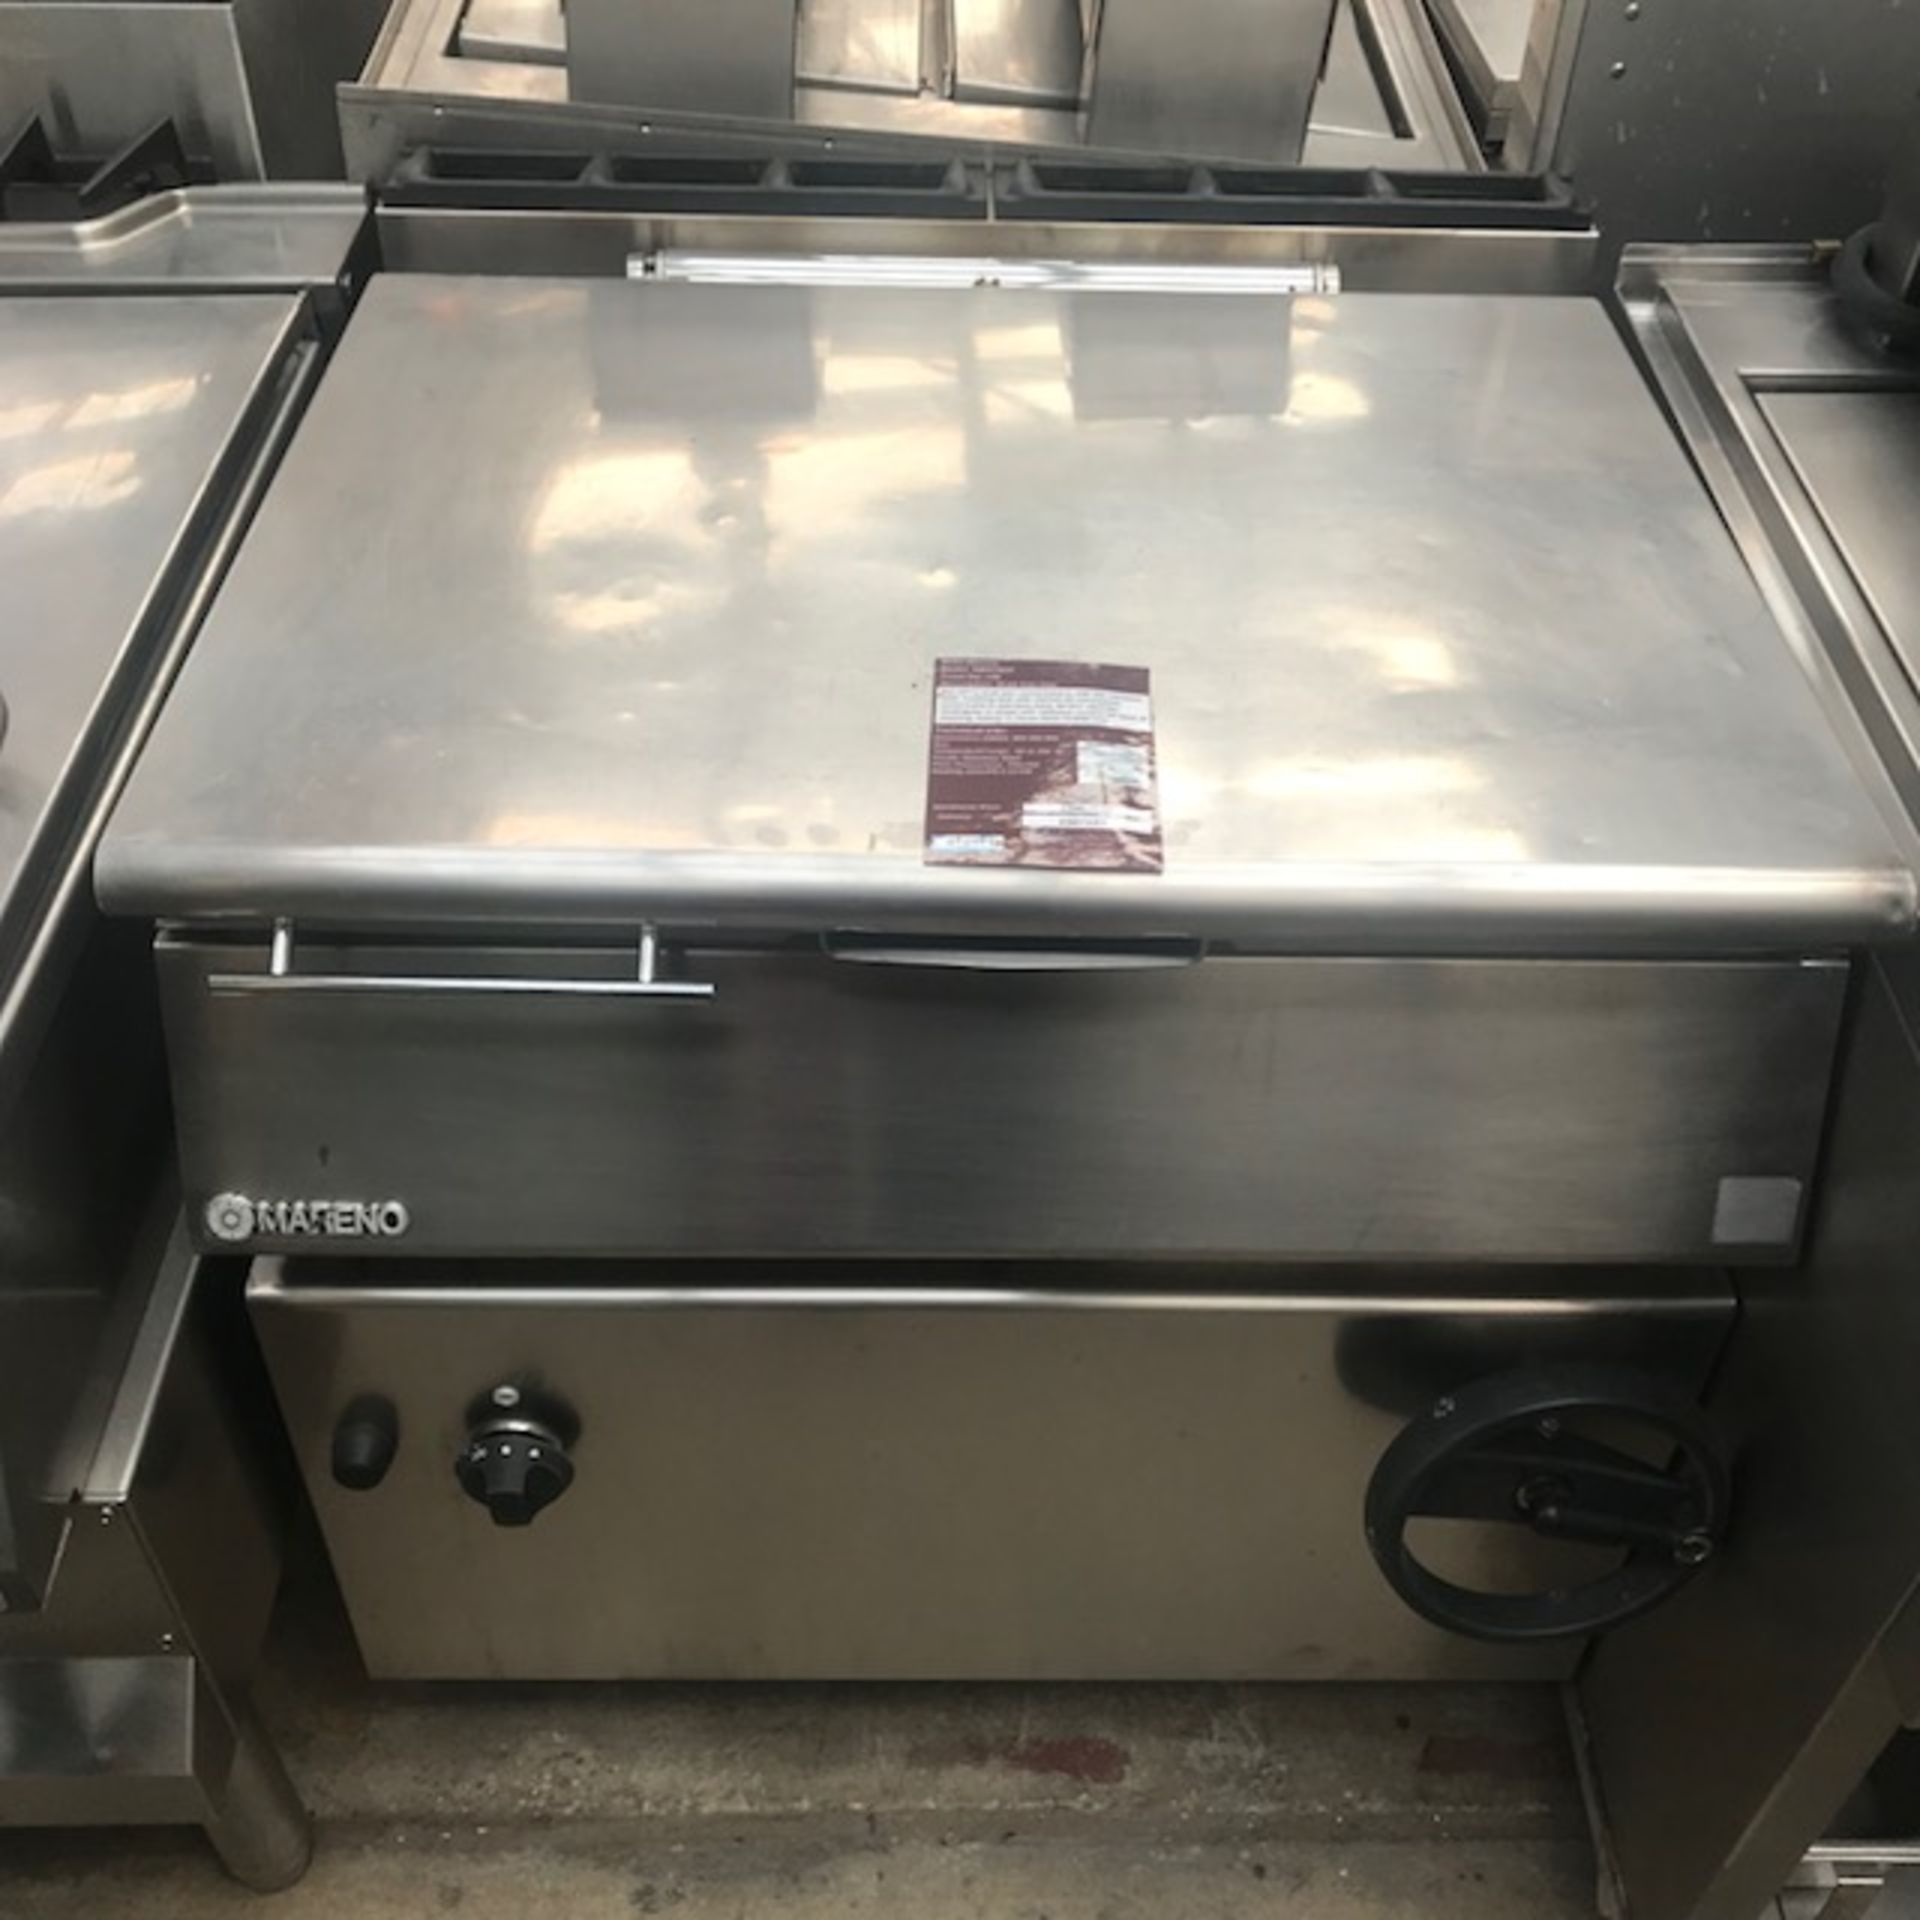 Mareno NBR78GF Gas Bratt Pan Tilting bratt pans are the most practical and advanced solution for